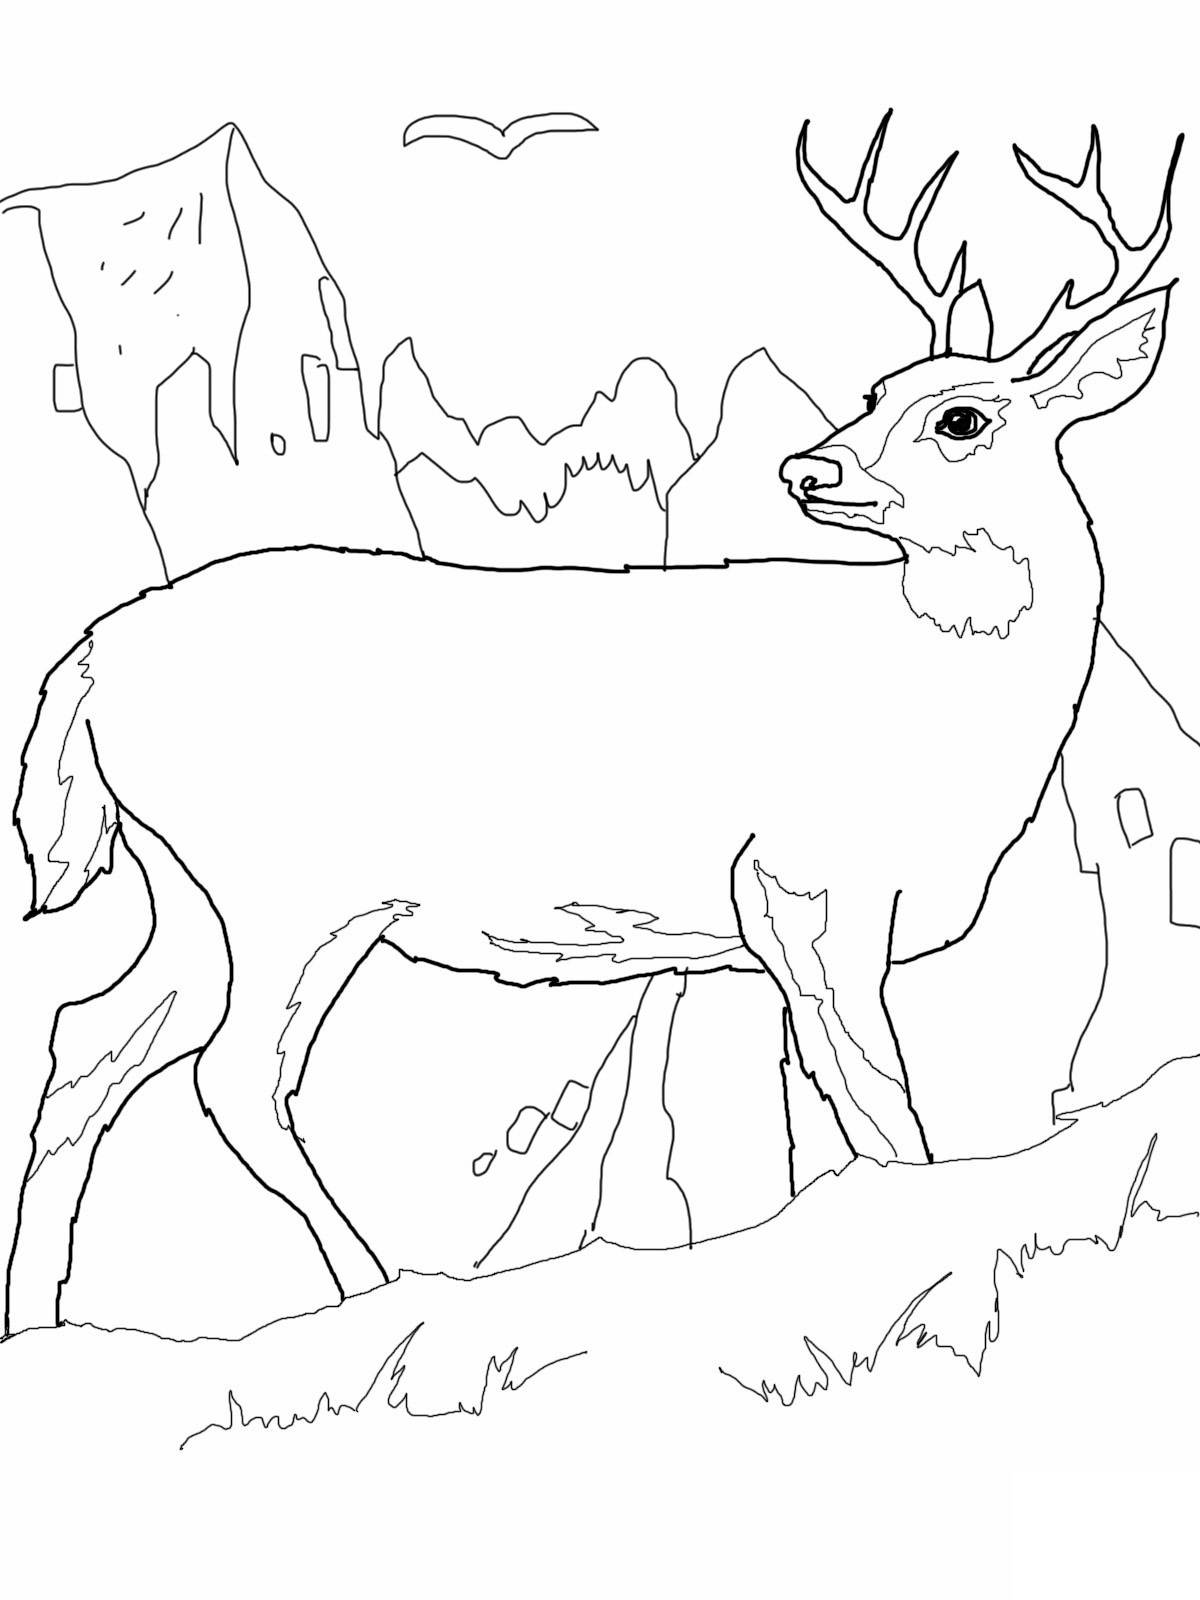 Deer coloring pages to download and print for free